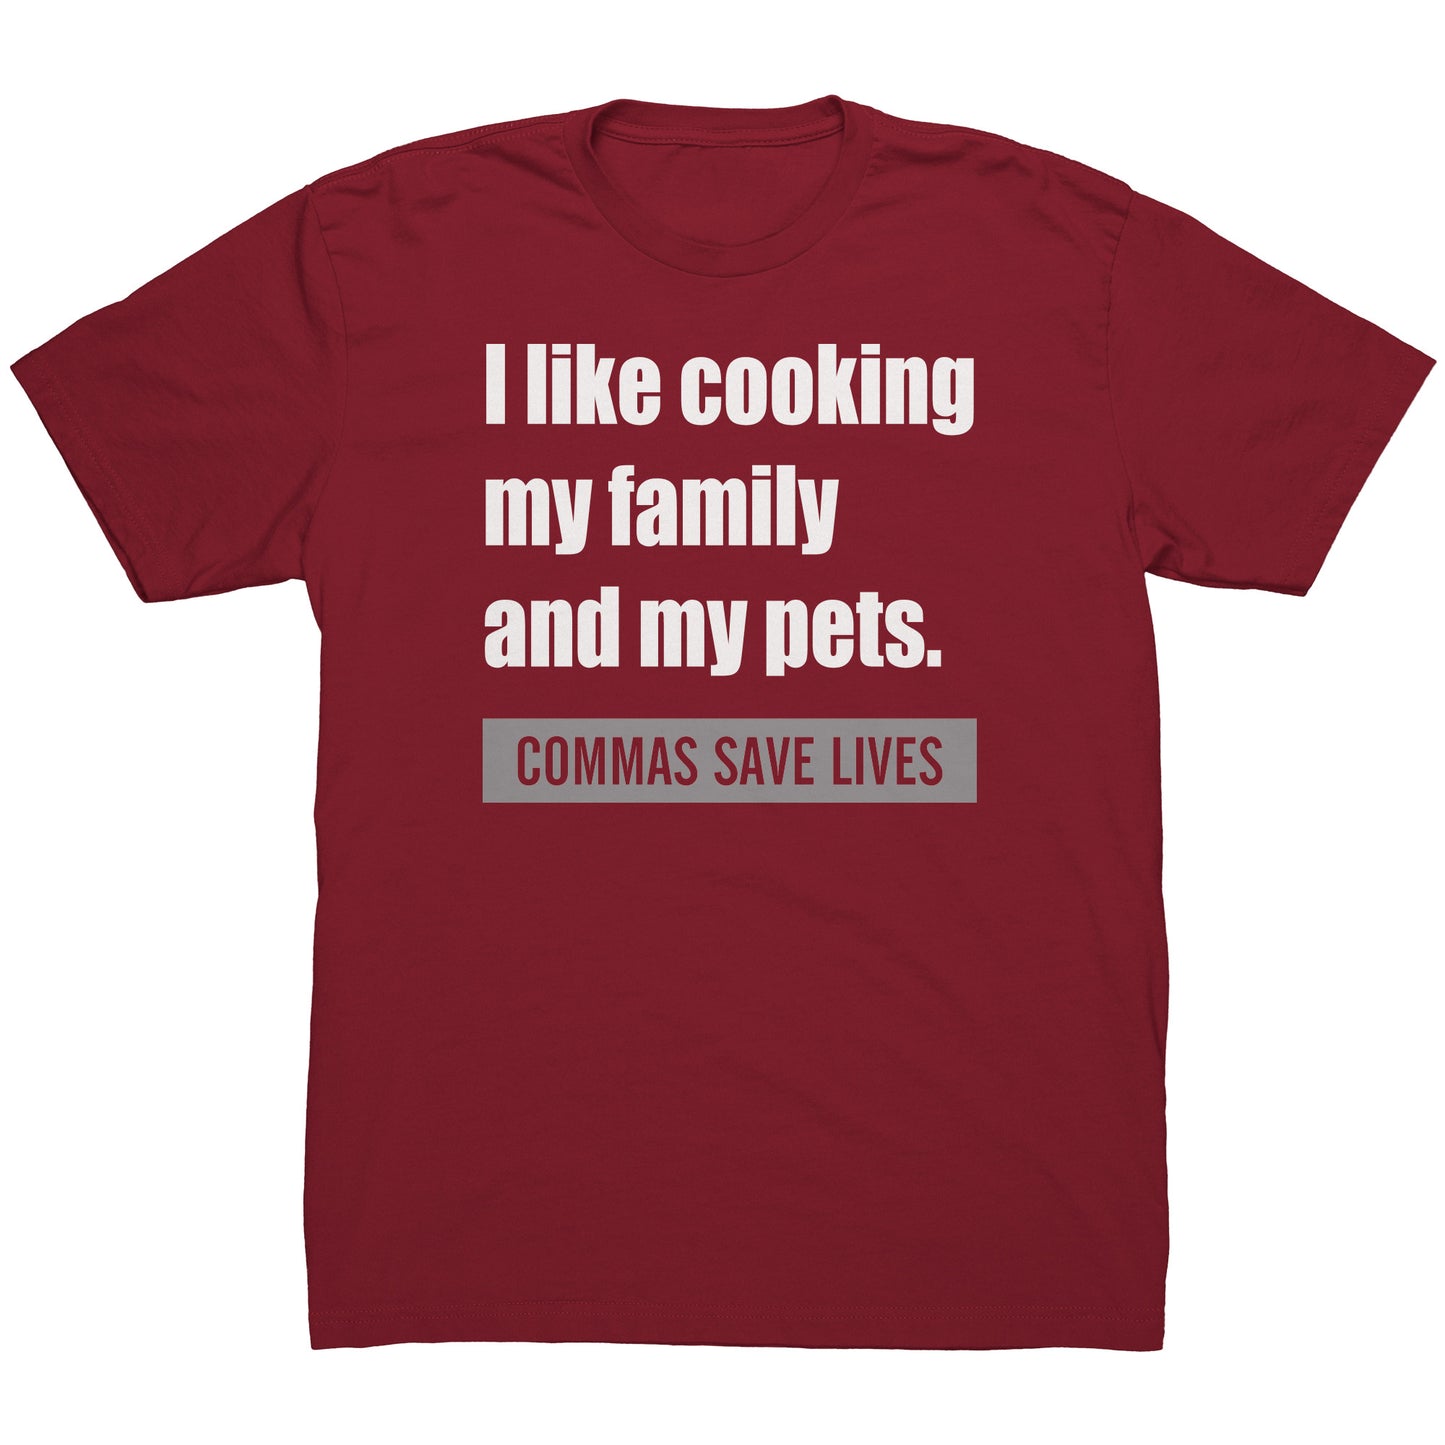 I Like Cooking My Family And My Pets. Commas Save Lives | Men's T-Shirt